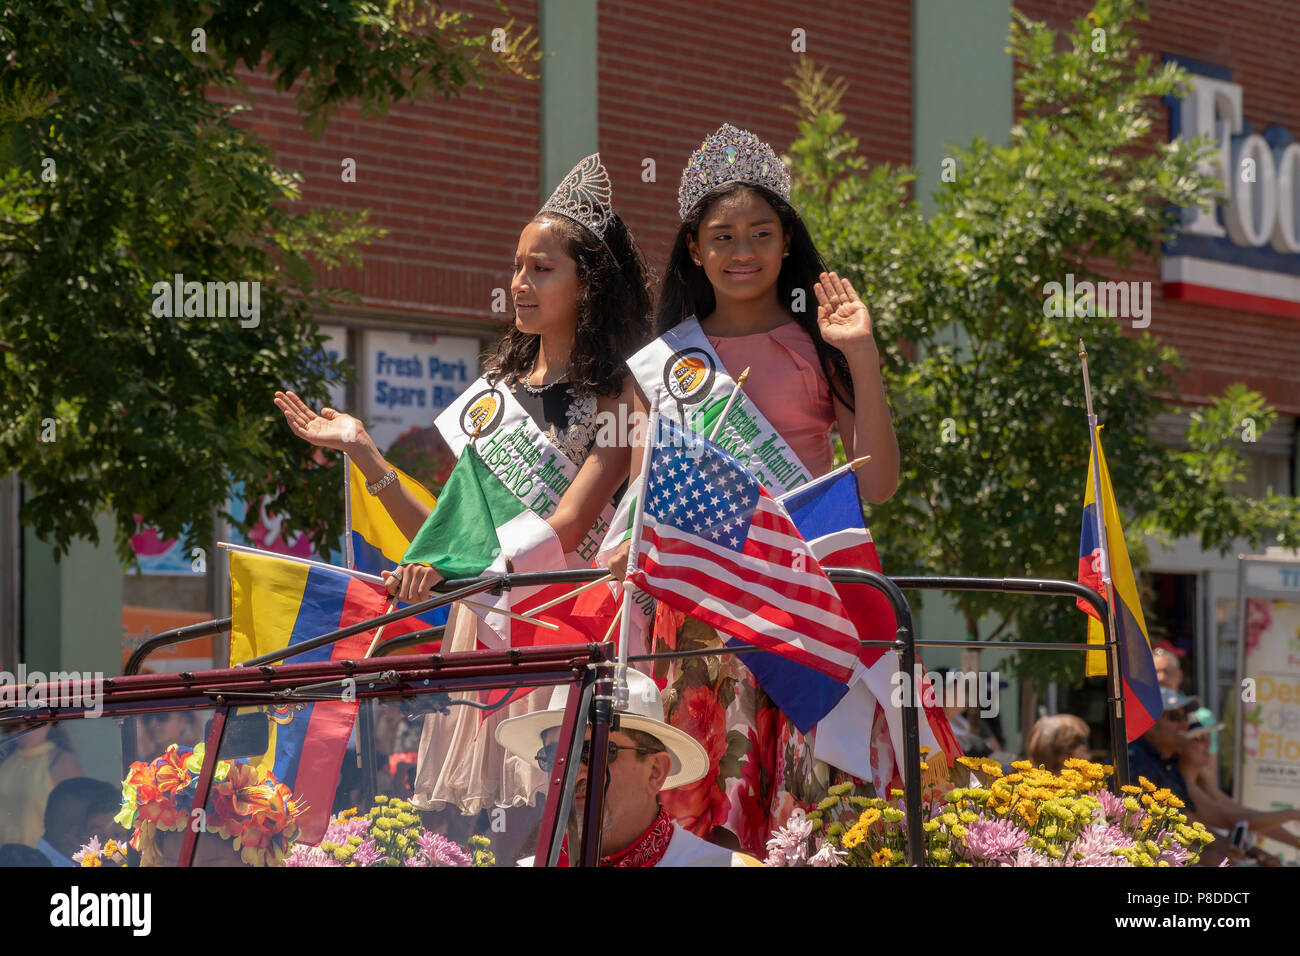 Hispanic beauty queens in the 9th Annual Flower Parade (Desfile de las Flores) in the Jackson Heights neighborhood of Queens in New York on Sunday, July 8, 2018. The parade, complete with silleteros, flower sellers, carrying medallions of flowers on their backs like the silleteros who carry them on their backs down the mountains in Colombia around the city of Medellin to sell at market. Stock Photo